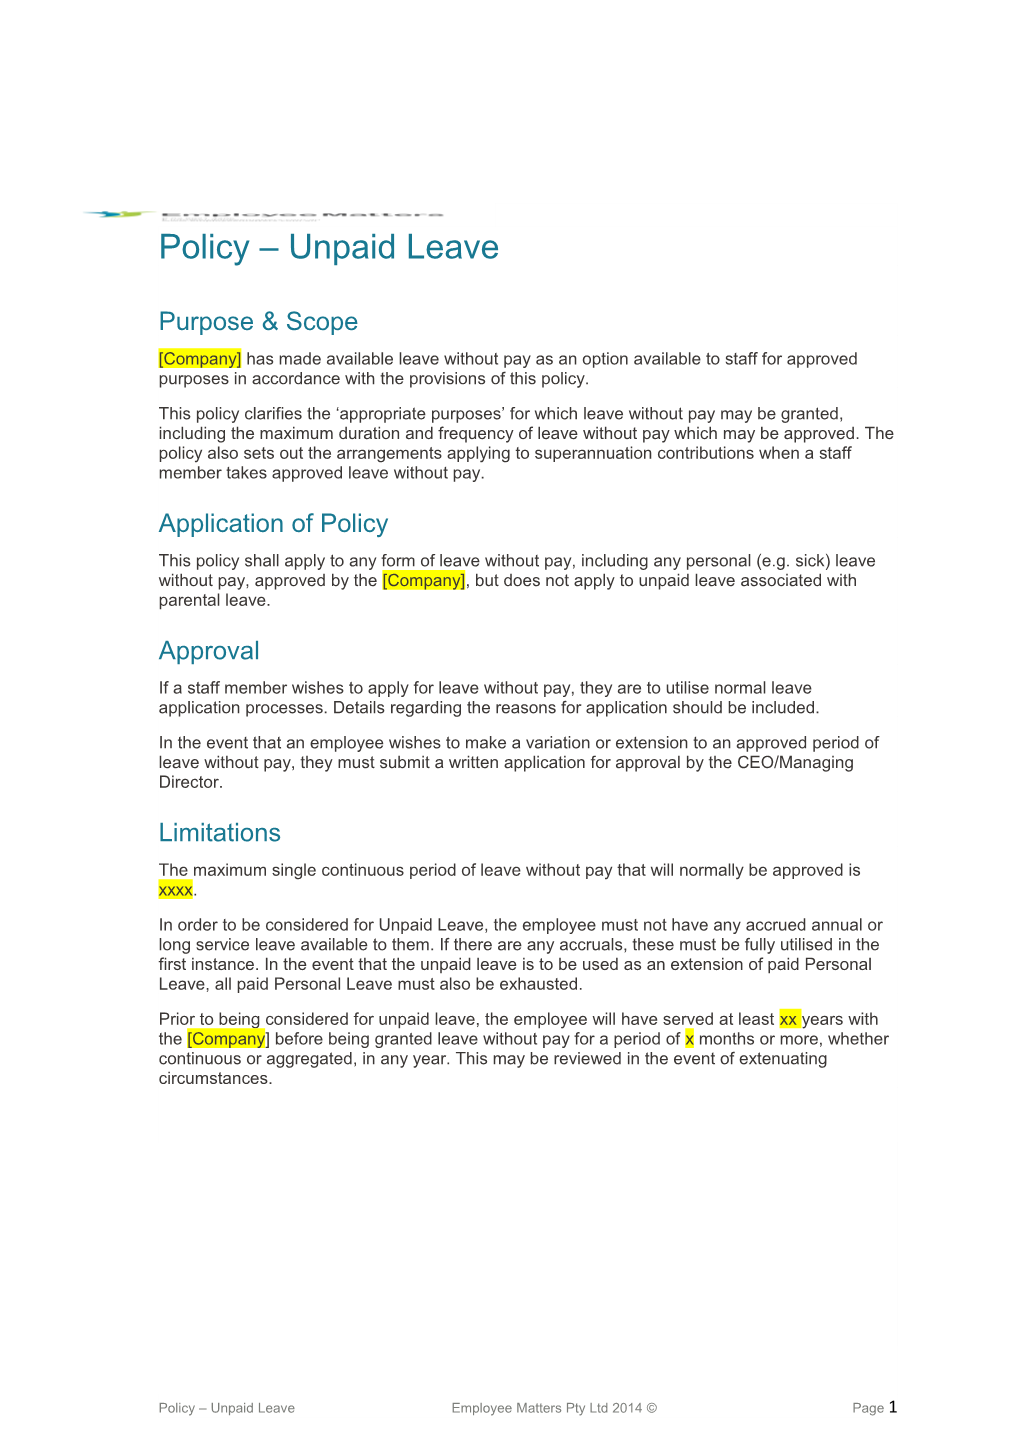 Policy Unpaid Leave